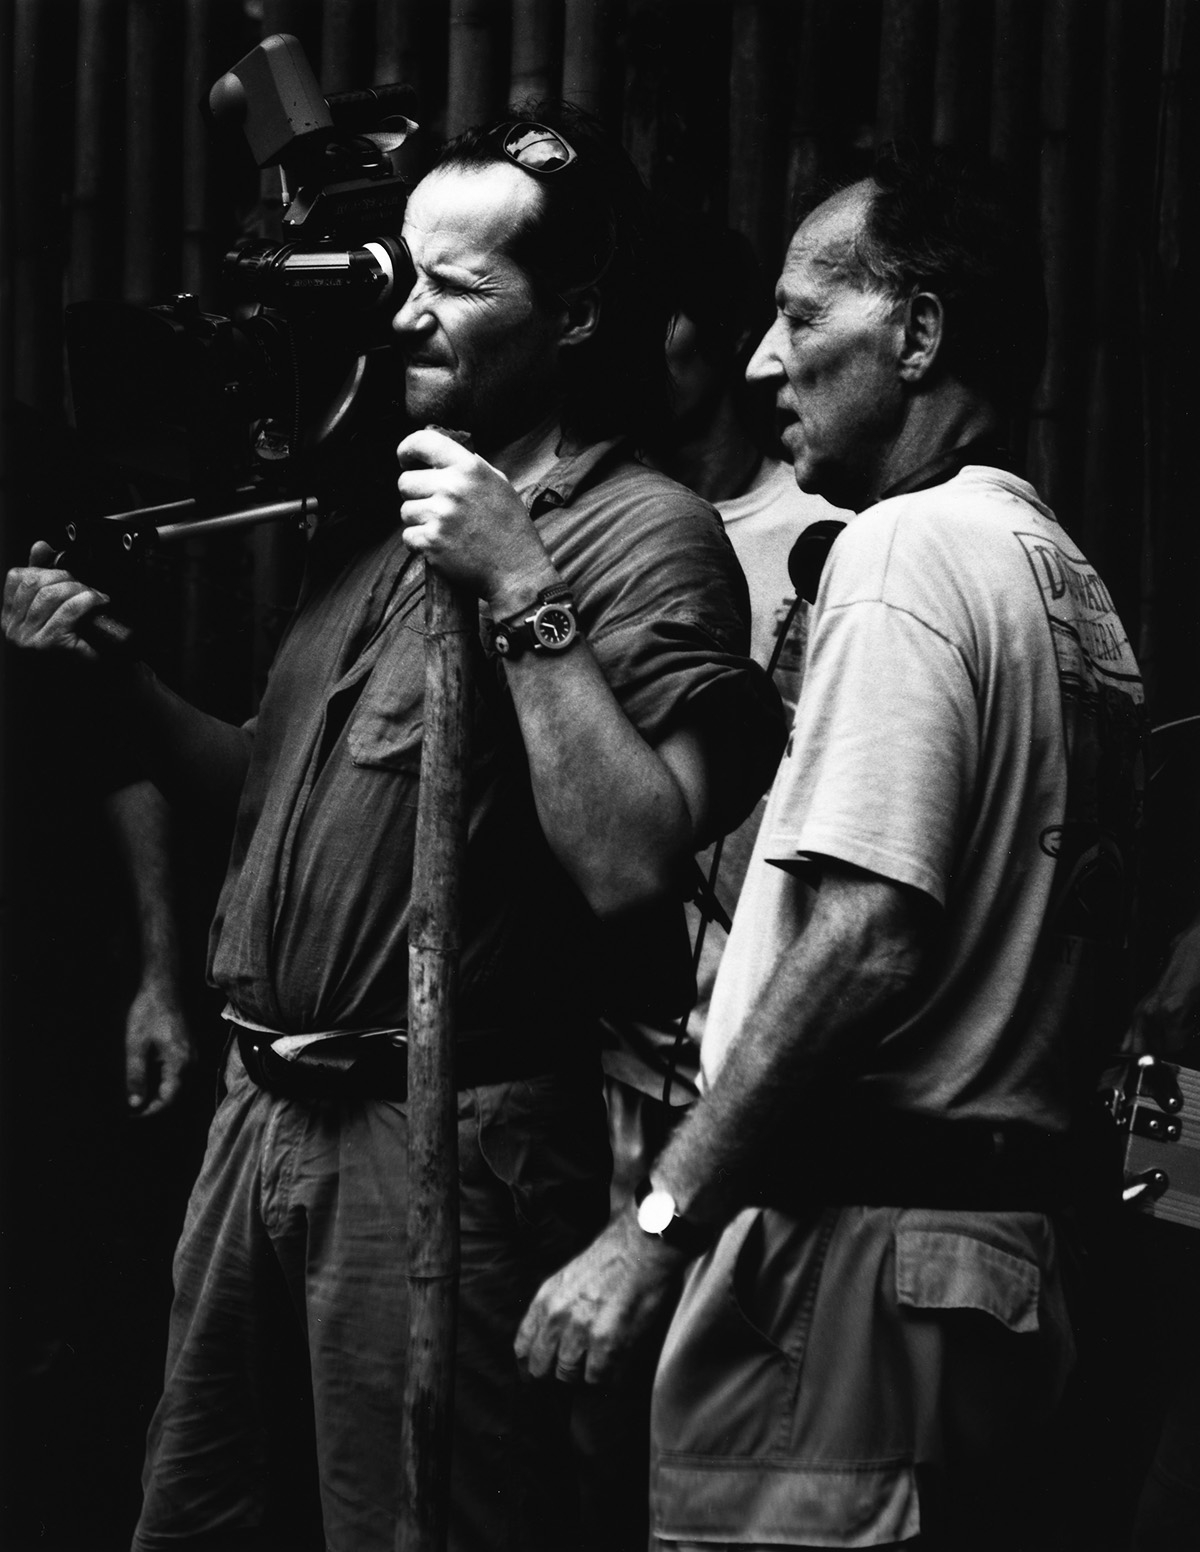 Black and white photo: The director is standing next to his cameraman, who is looking through the viewfinder.